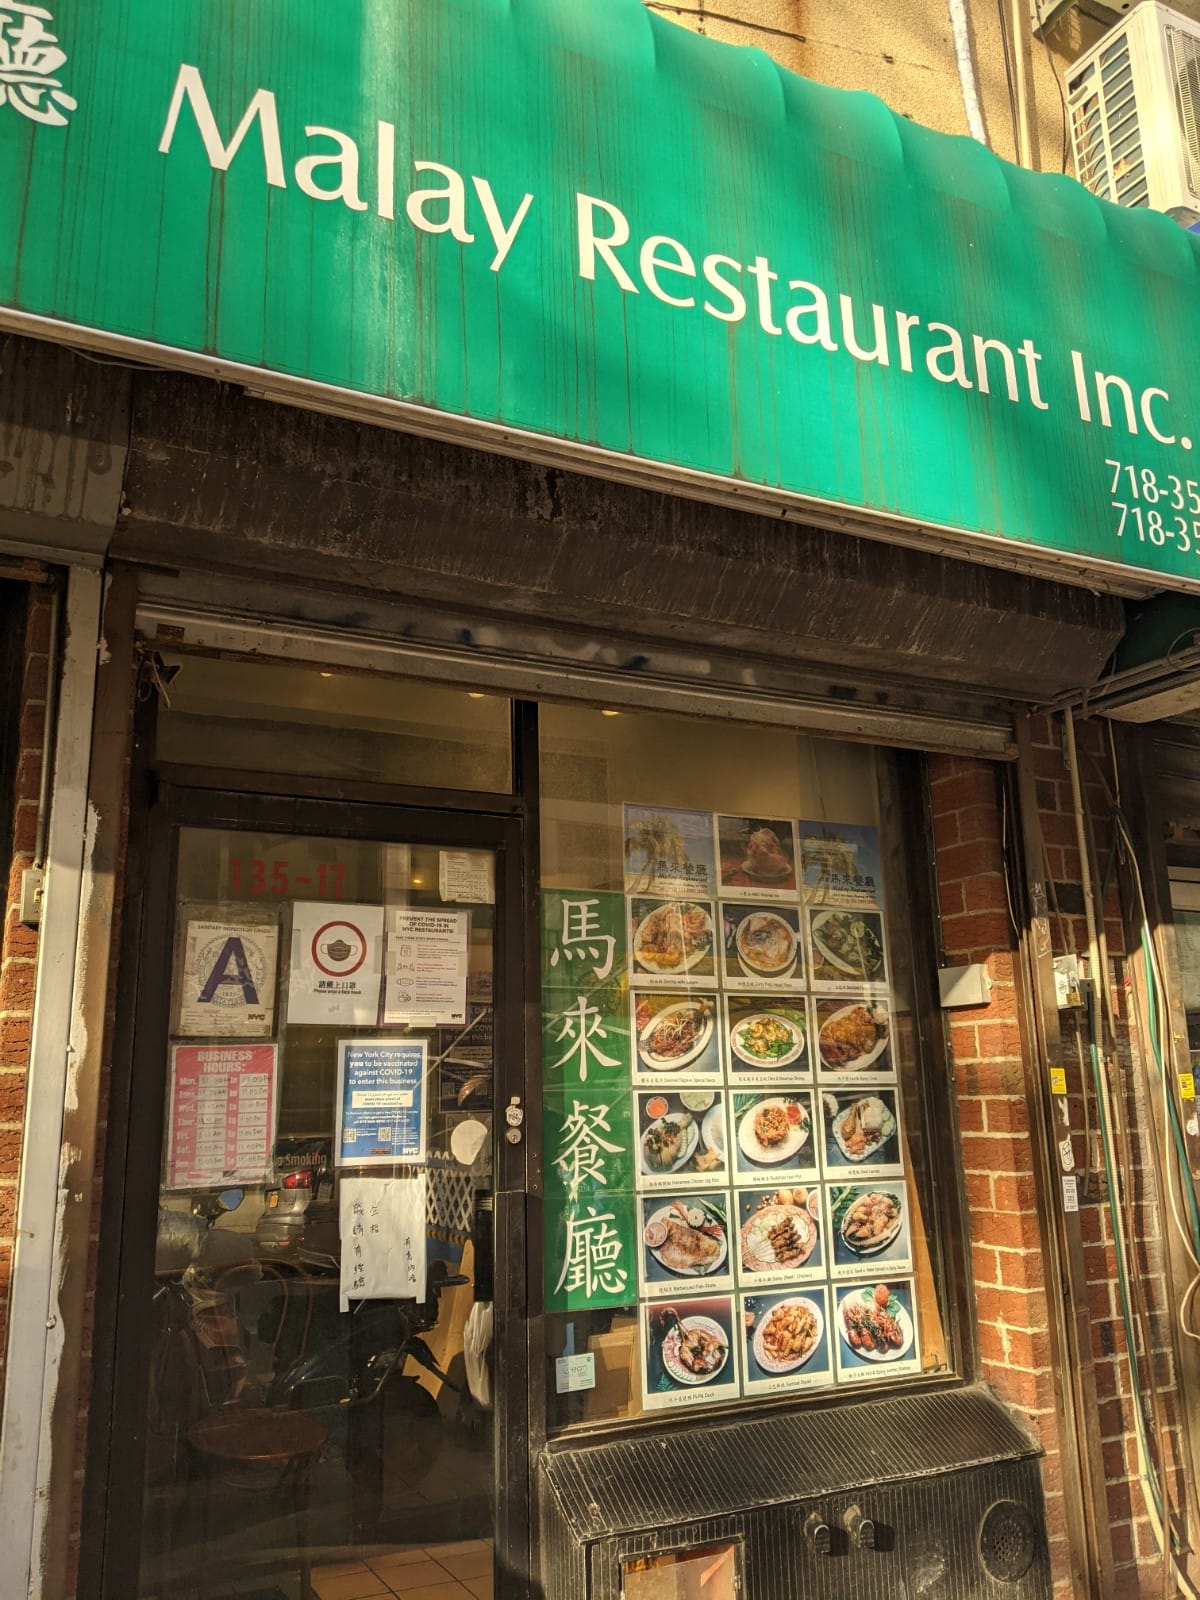 Eating at Malay Restaurant in Flushing Queens NY